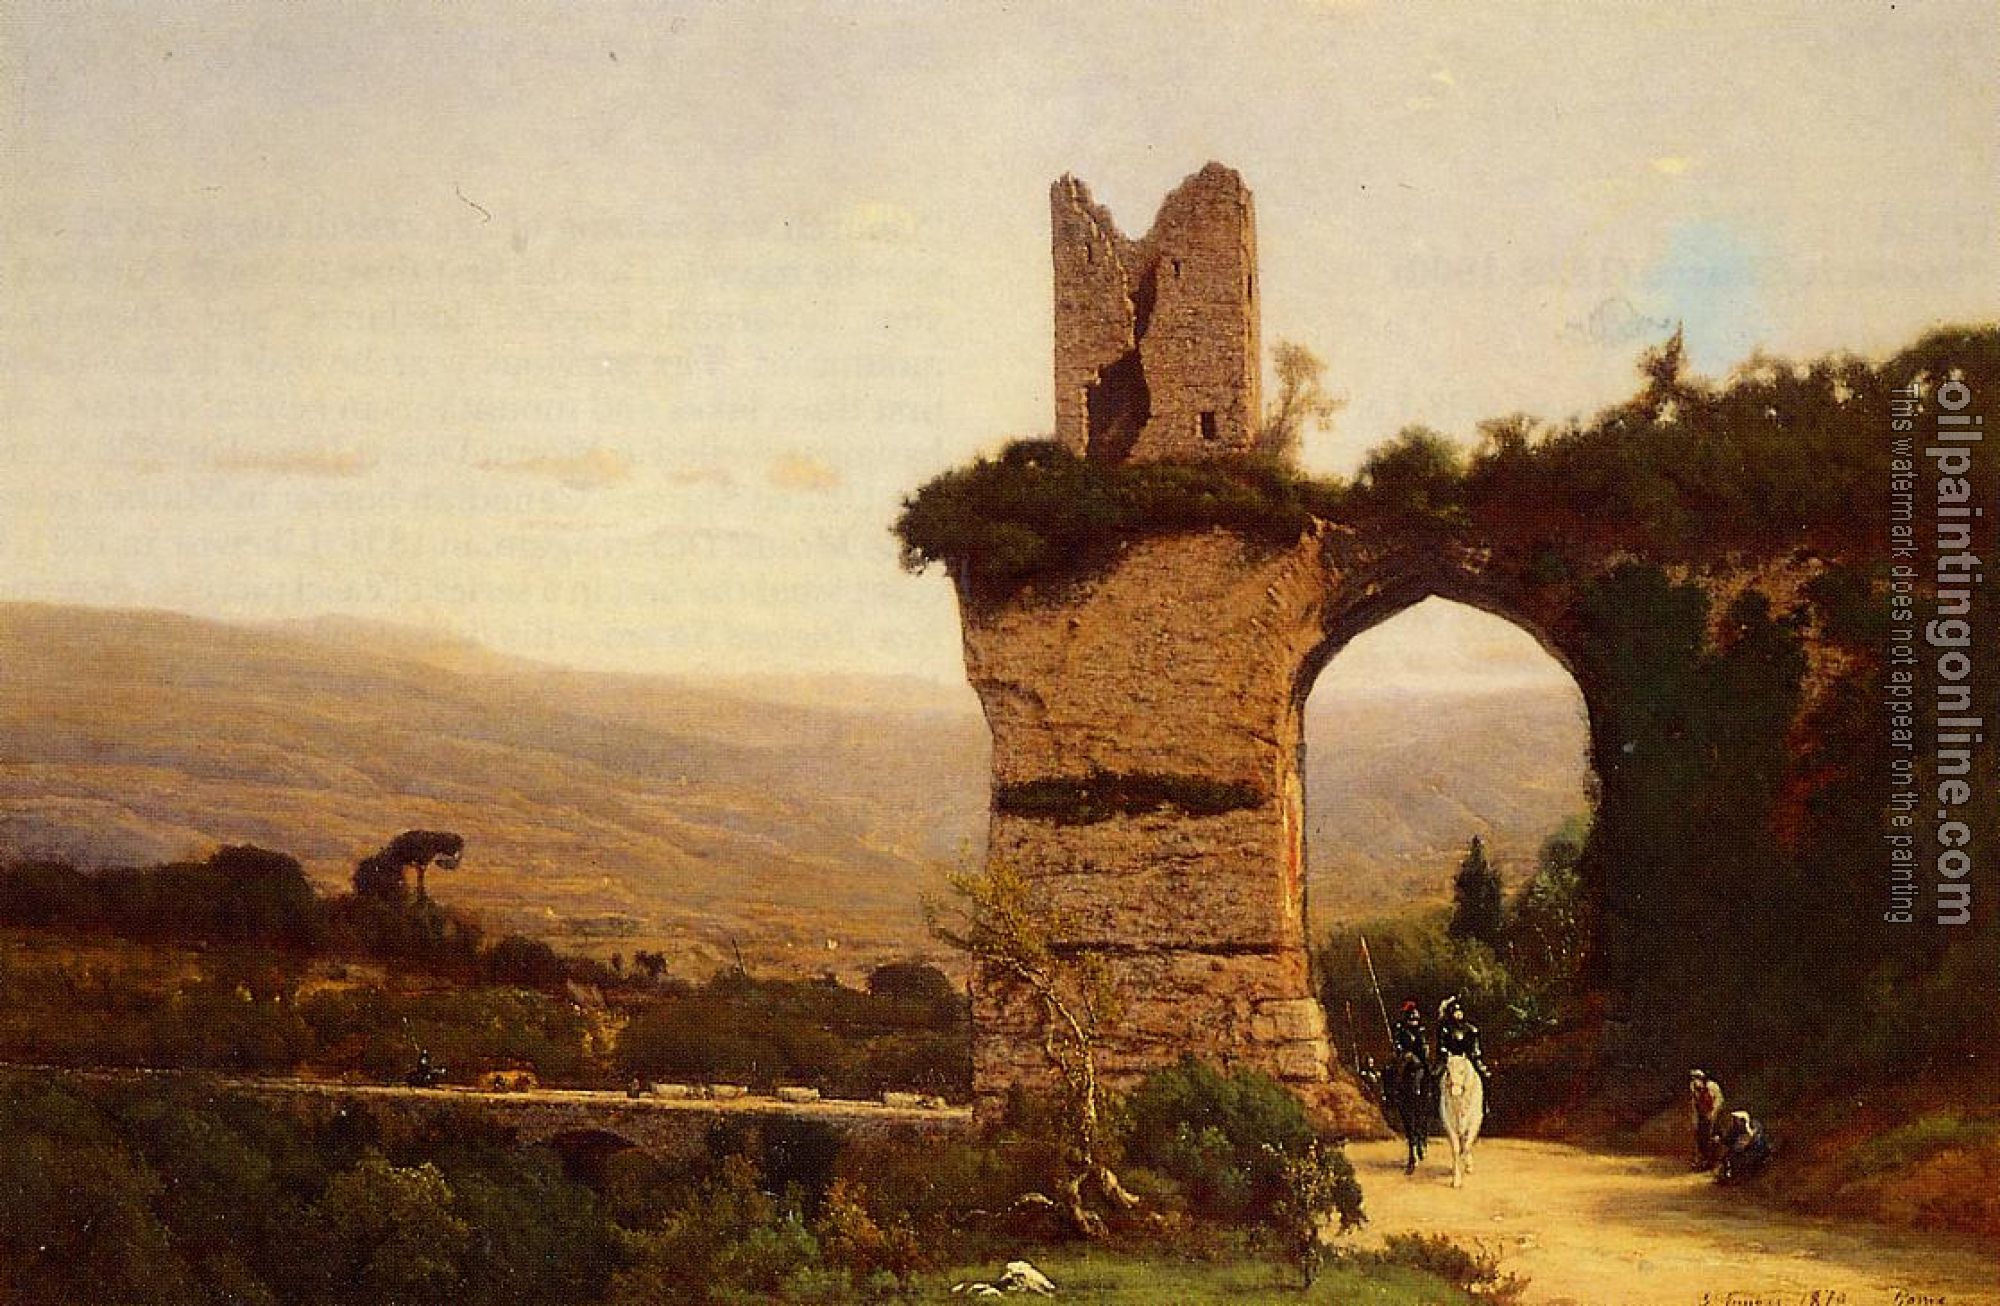 George Inness - The Commencement of the Galleria aka Rome the Appian Way